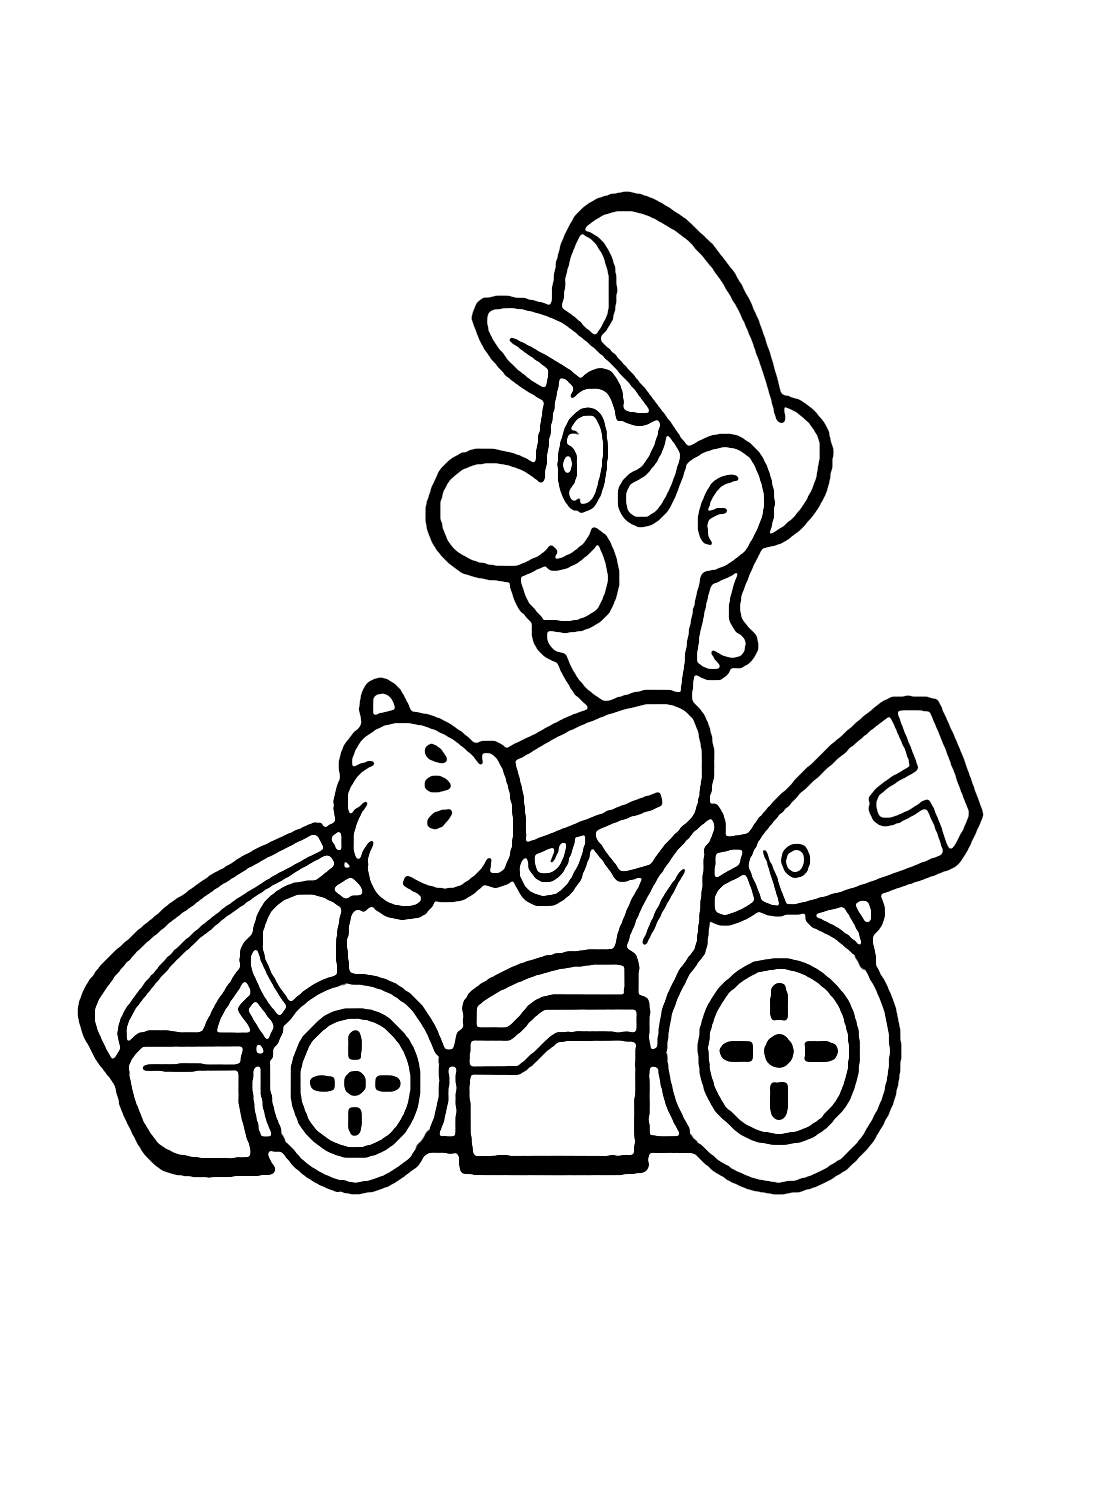 Luigi from Mario Kart Coloring Pages